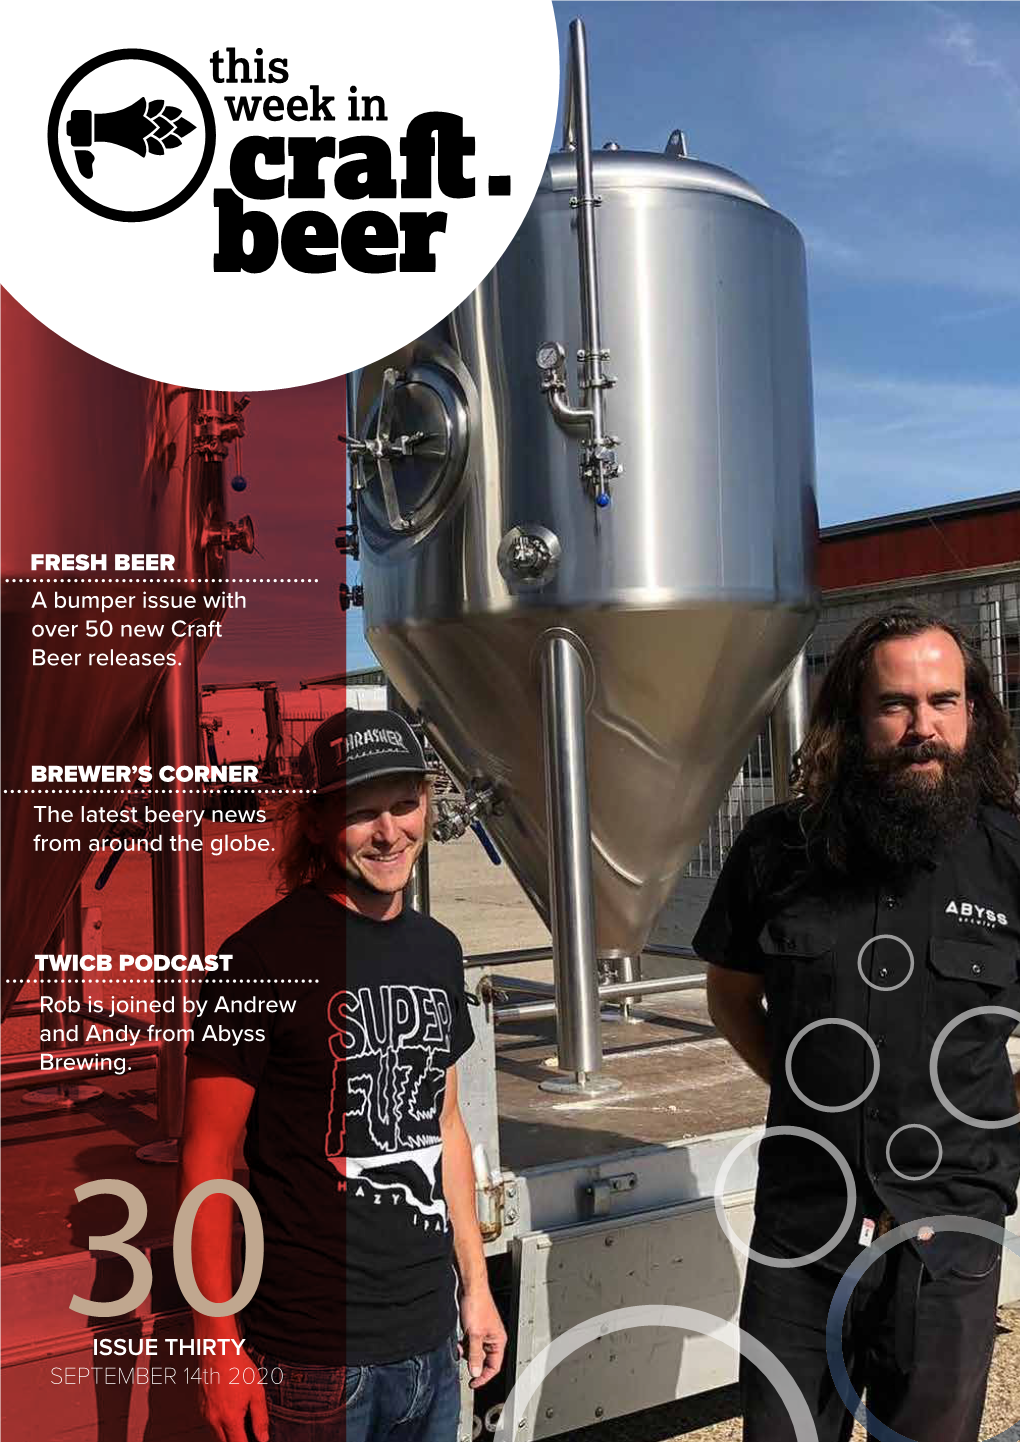 A Bumper Issue with Over 50 New Craft Beer Releases. the Latest Beery